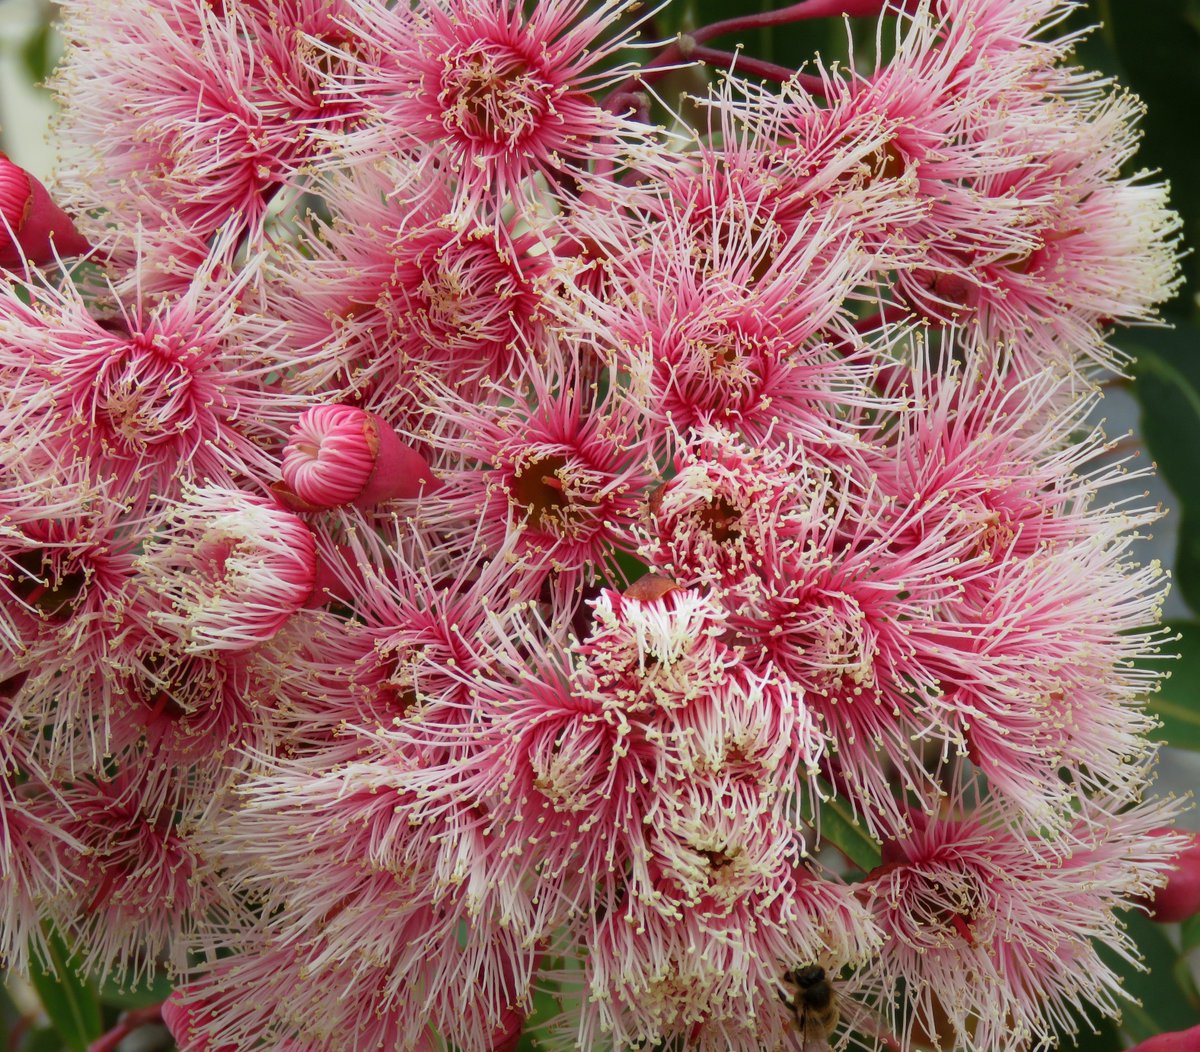 Corymbia ficifolia 'Fairy Floss'  
Cultivar of the red-flowering gum from the south of Western Australia

#Corymbia #ozplants